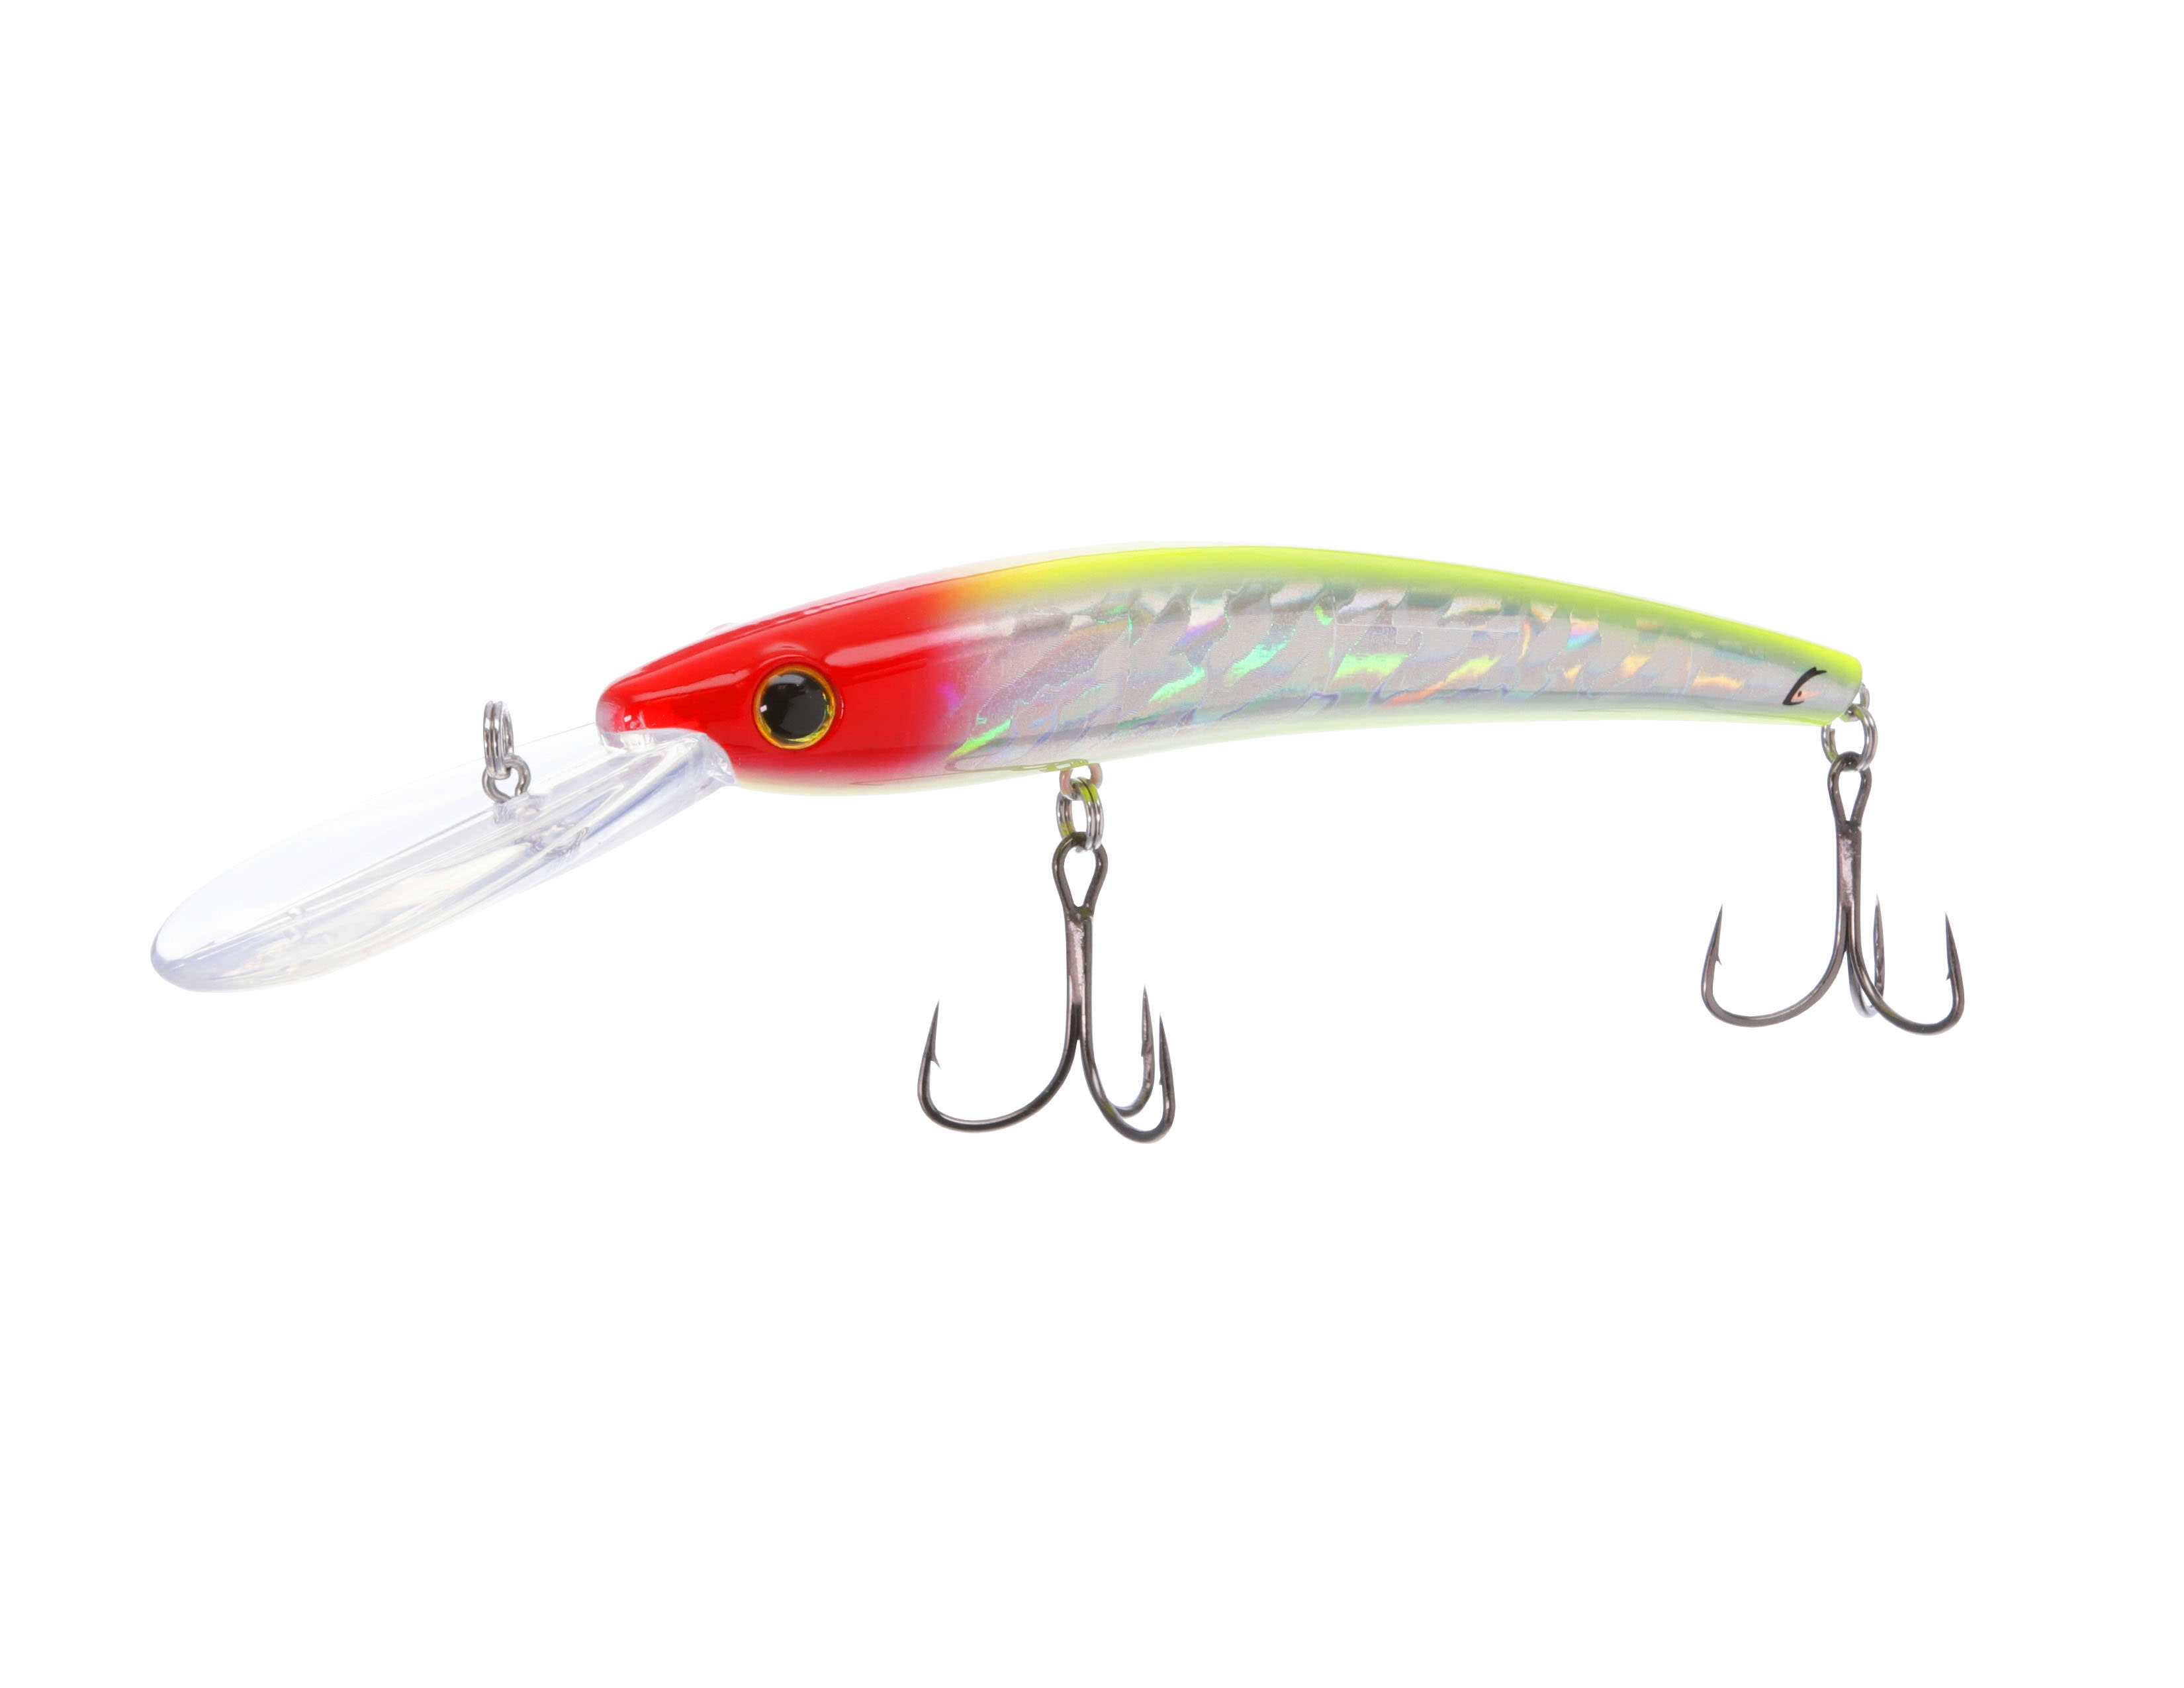 Cotton Cordell® Wally Diver® Lures